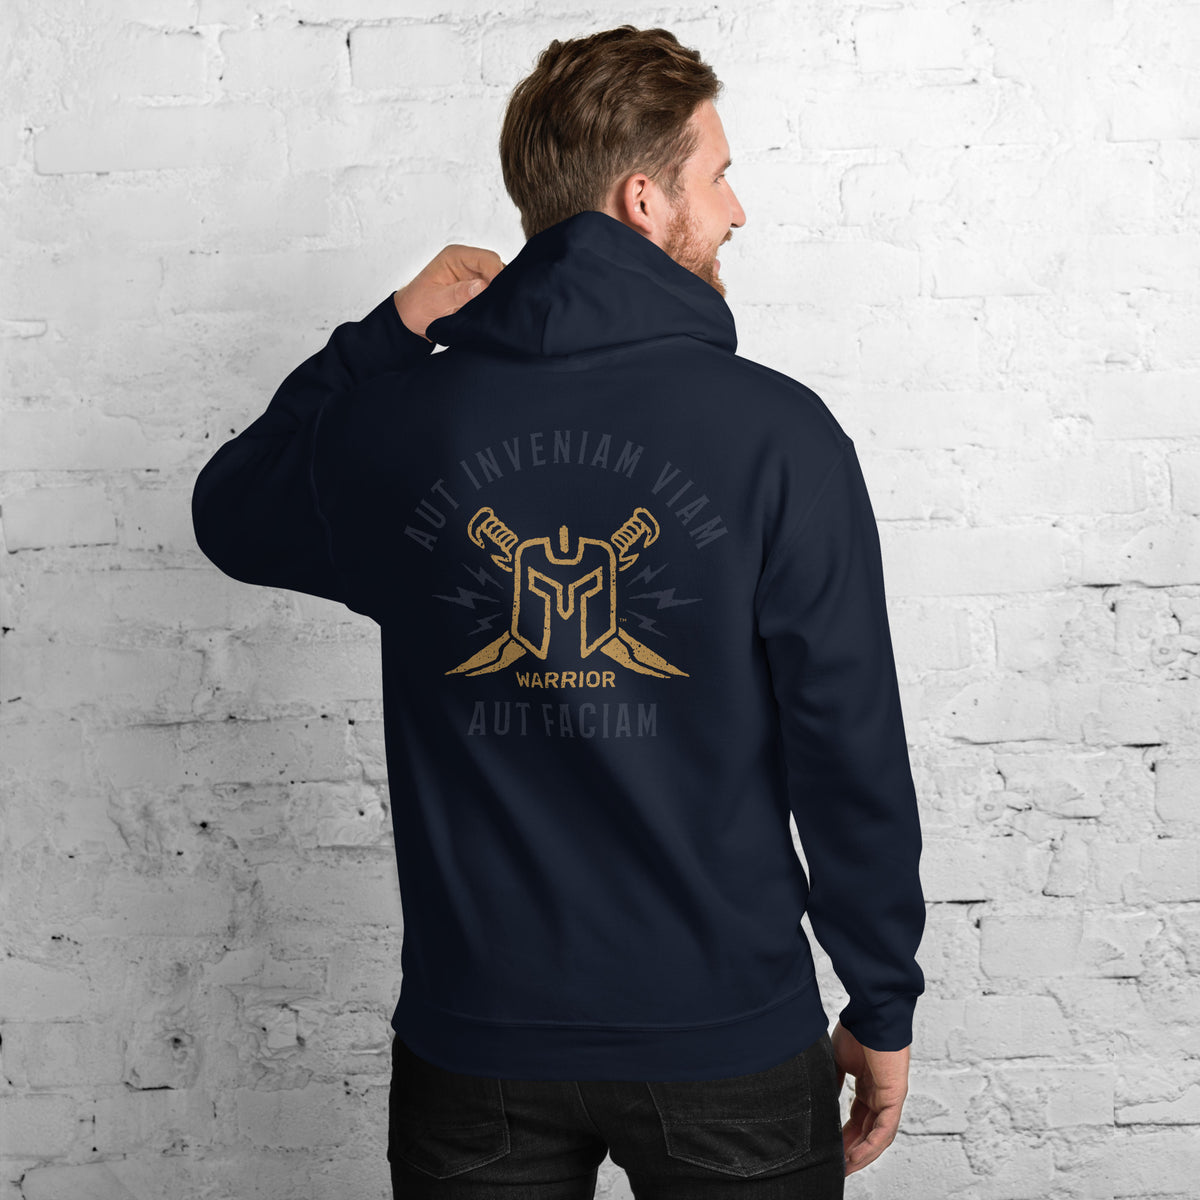 Aut Inveniam Viam Aut Faciam (Latin - I shall either find a way or make one) Unisex Hoodie